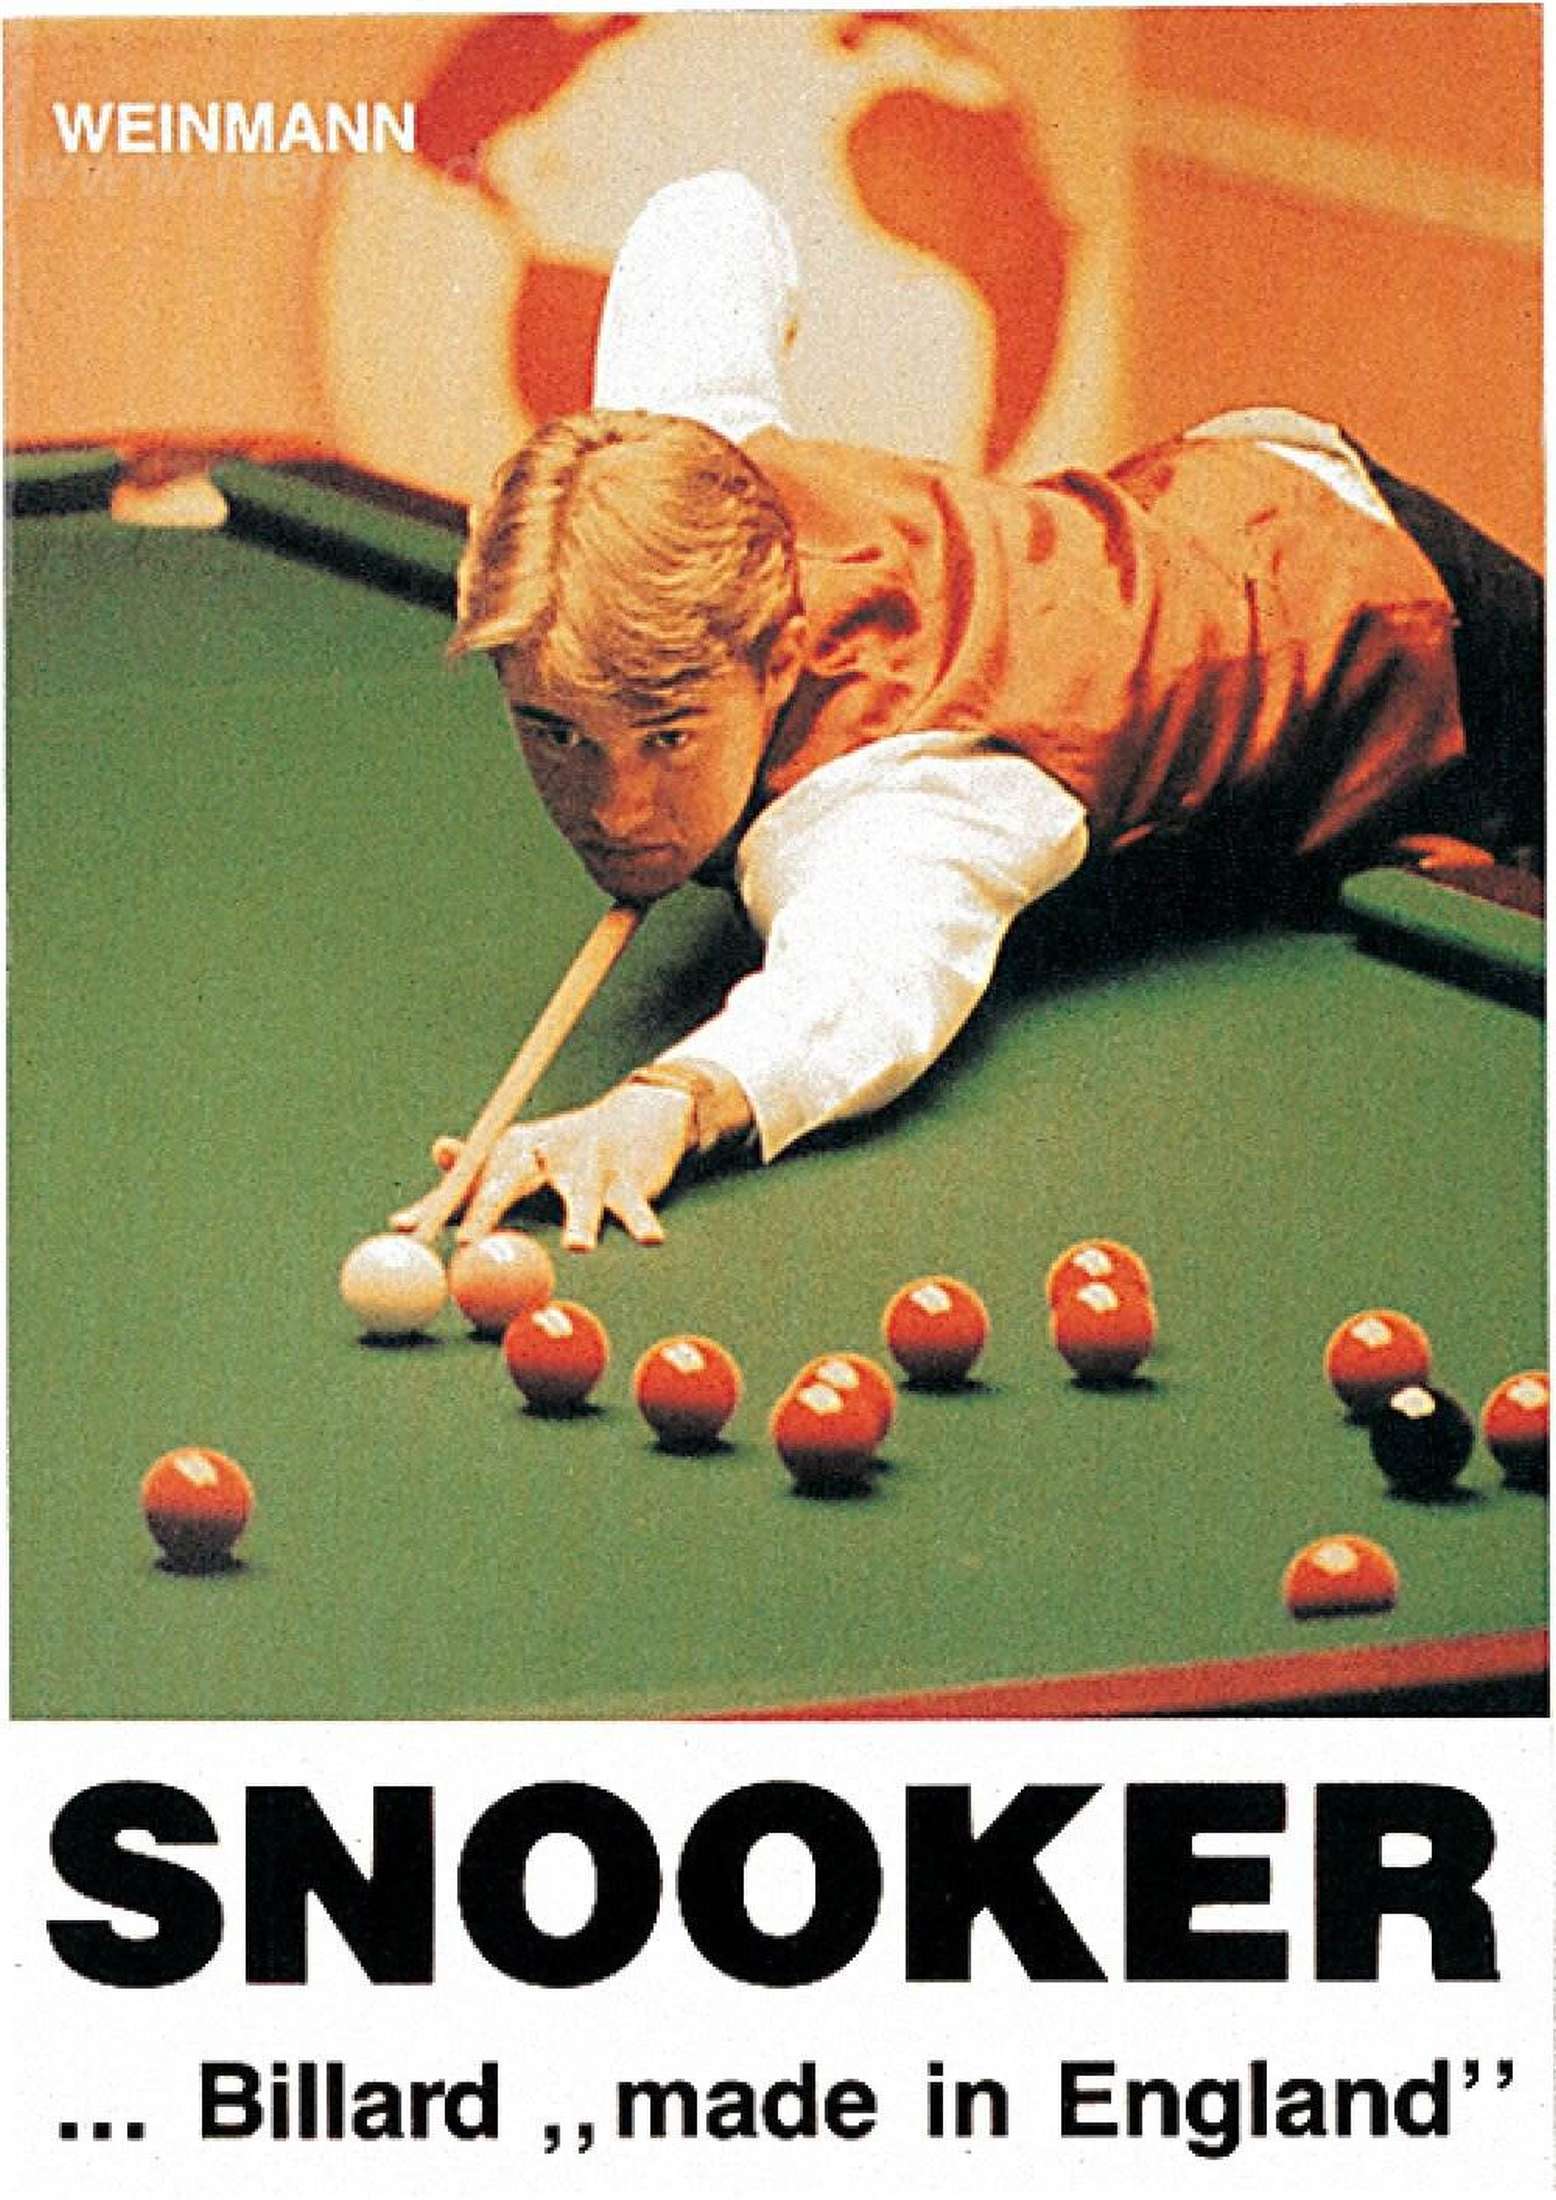 Book Snooker Billiards made in England-1